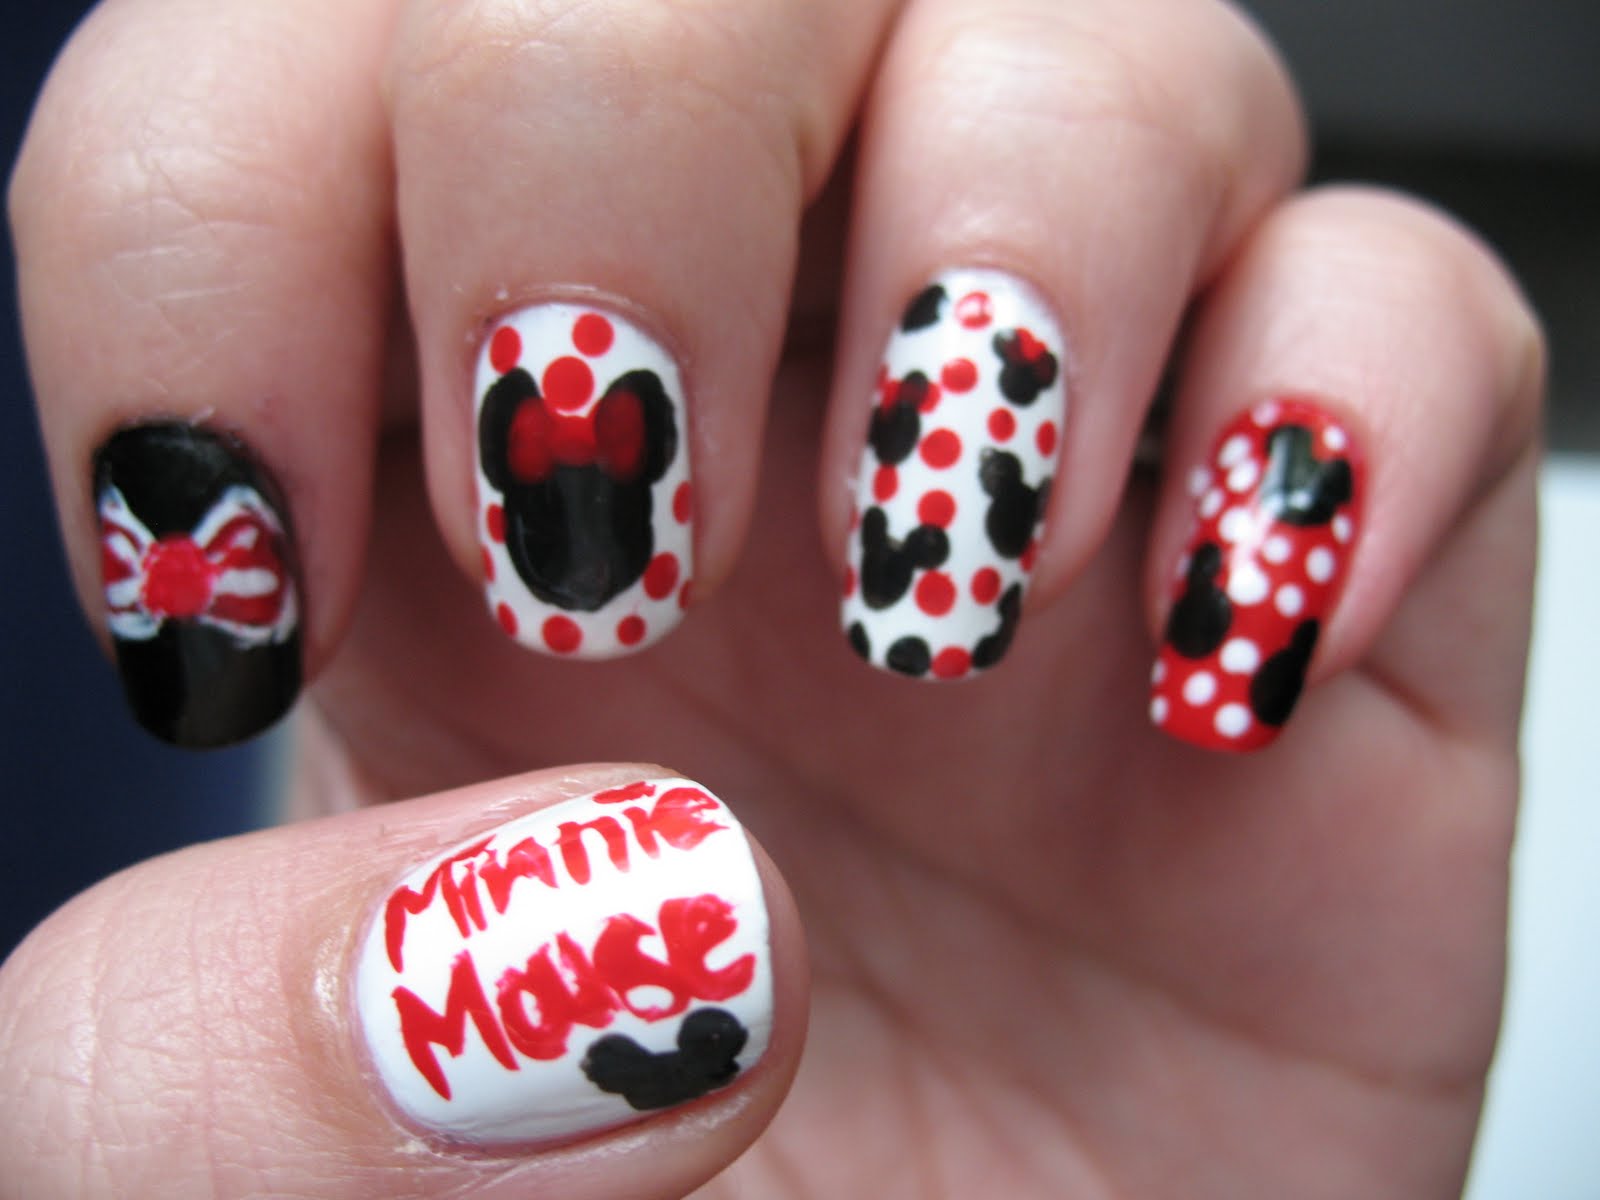 3. Minnie Mouse Nail Art Tutorial - wide 1